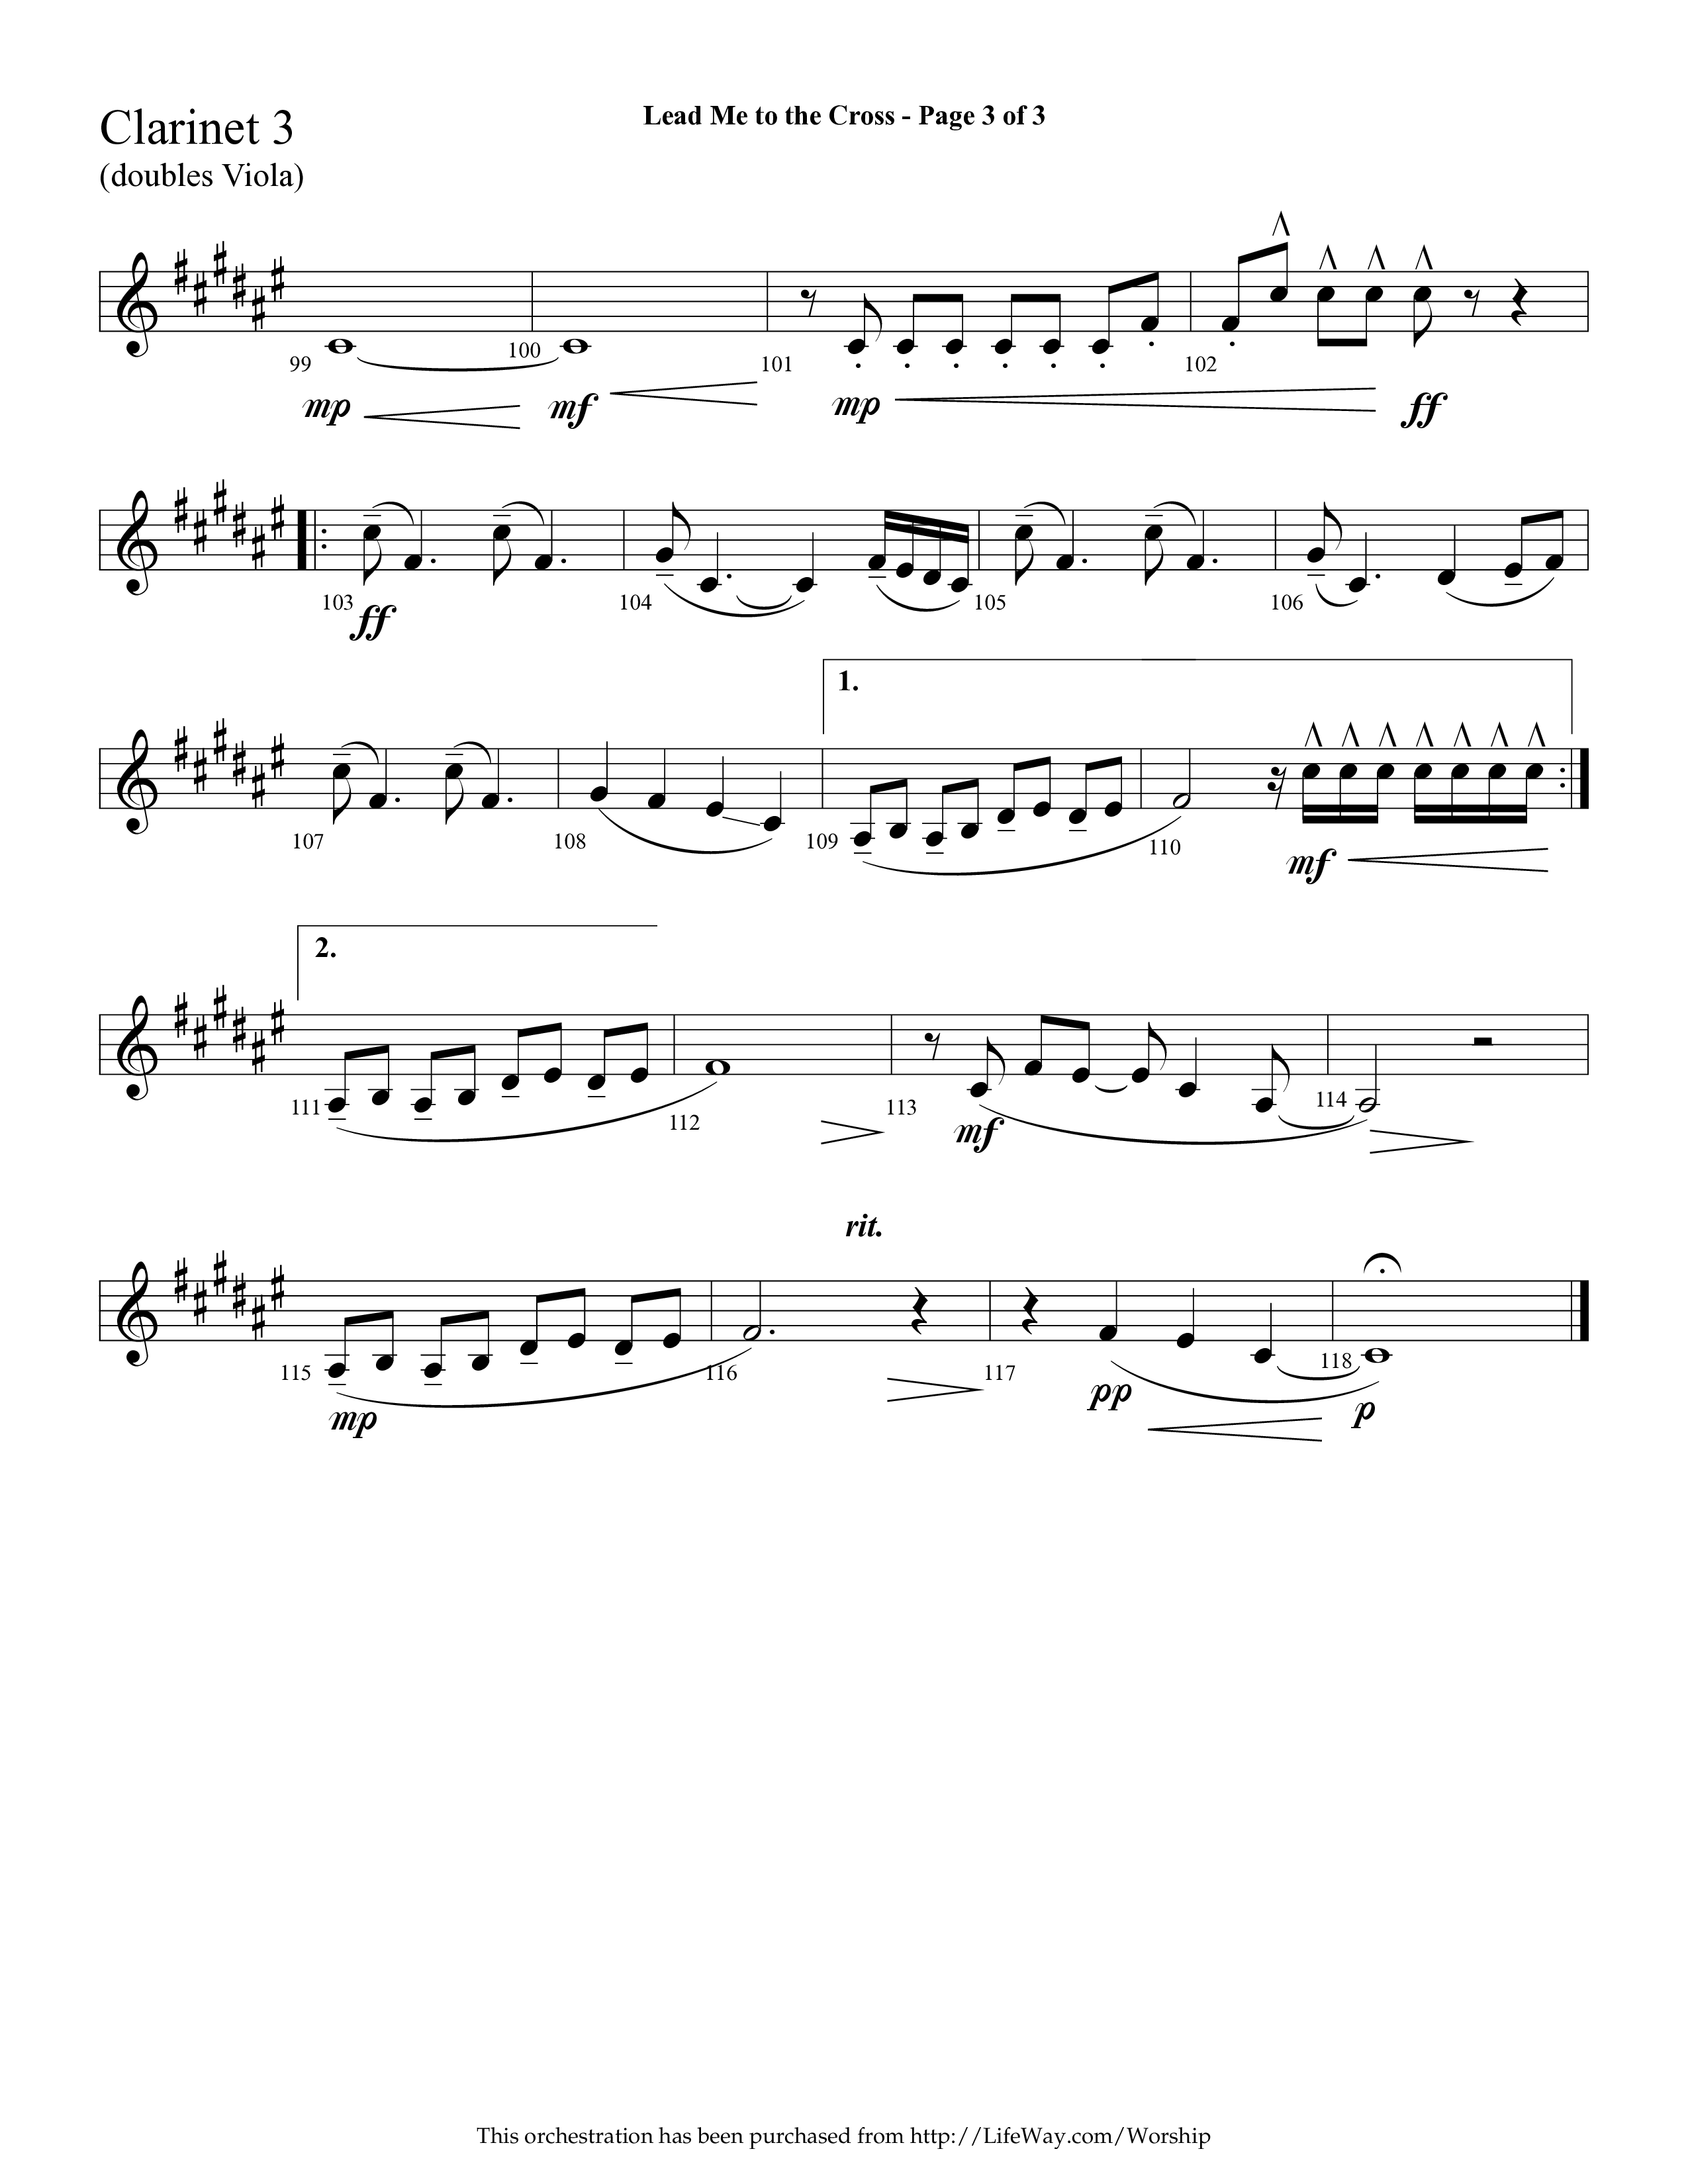 Lead Me To The Cross (Choral Anthem SATB) Clarinet 3 (Lifeway Choral / Arr. Cliff Duren)